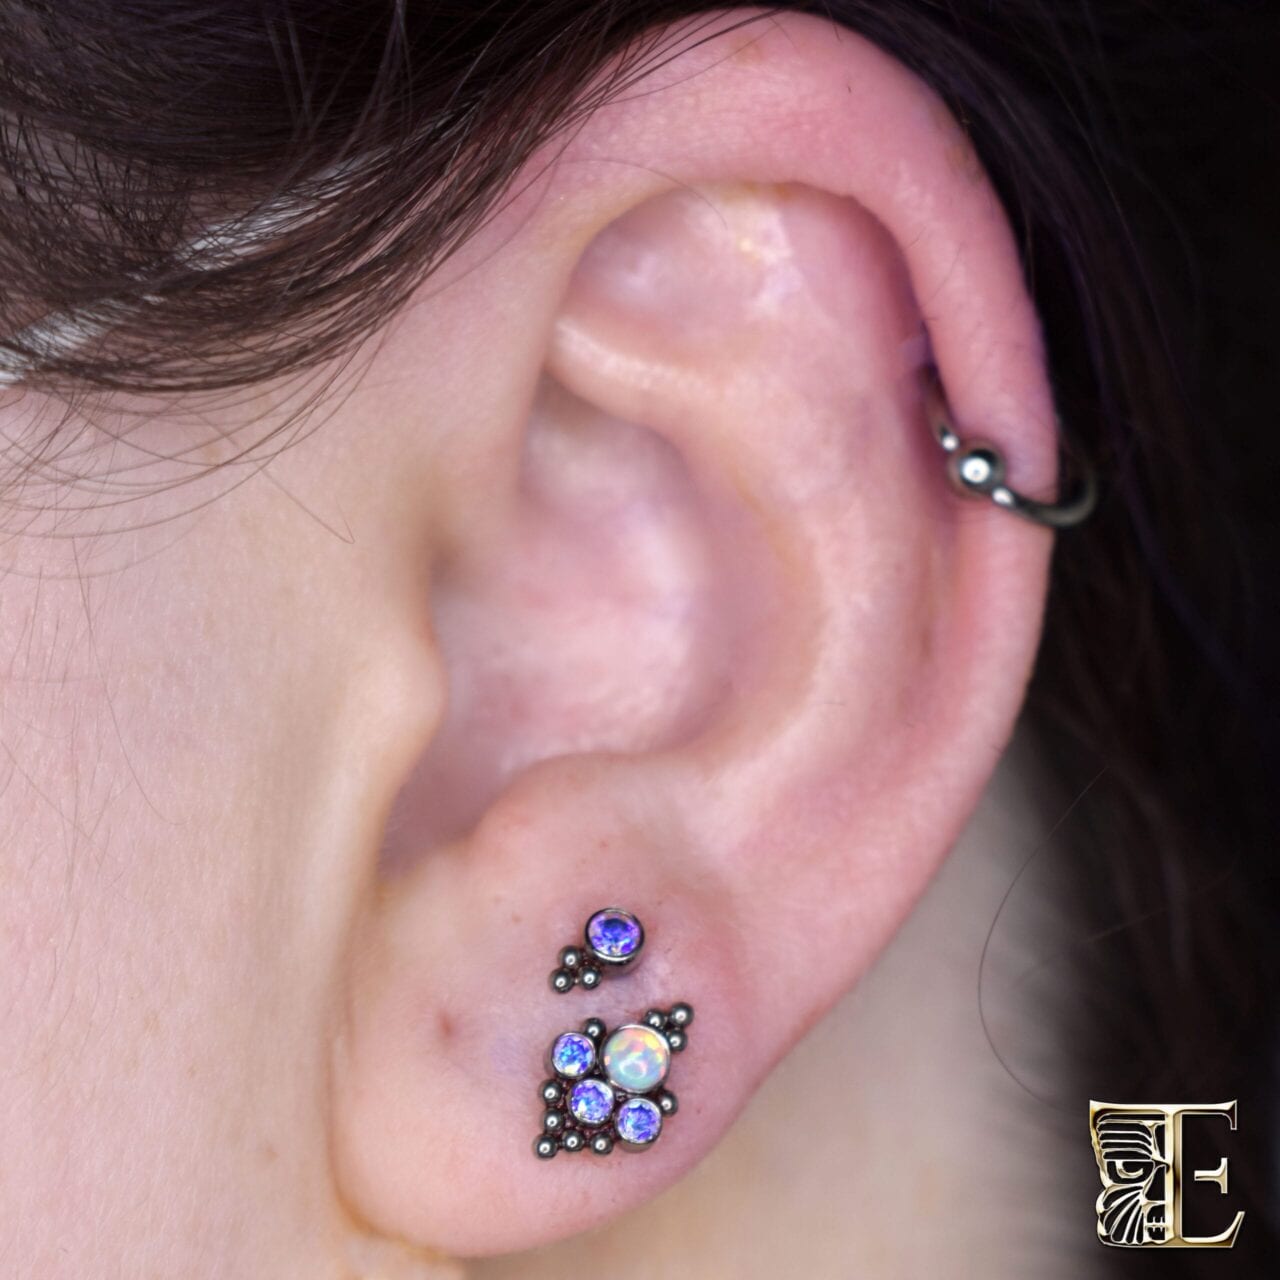 Stacked lobe piercing with 14g titanium opal and faceted gem threaded ends from LeRoi